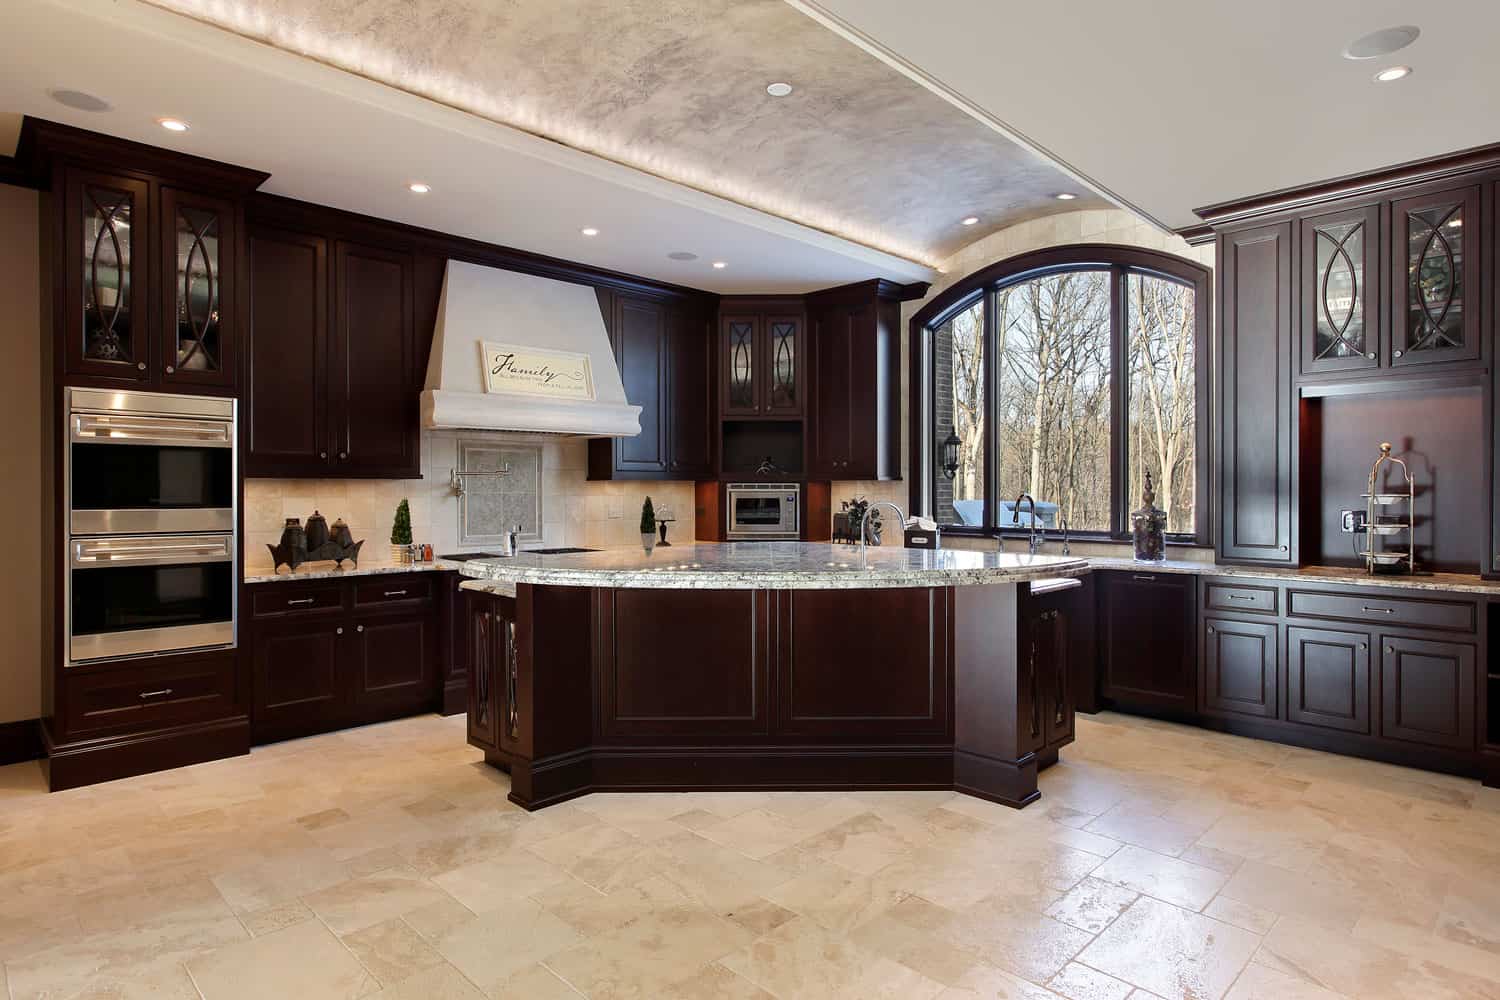 Large kitchen in luxury home with kitchen island